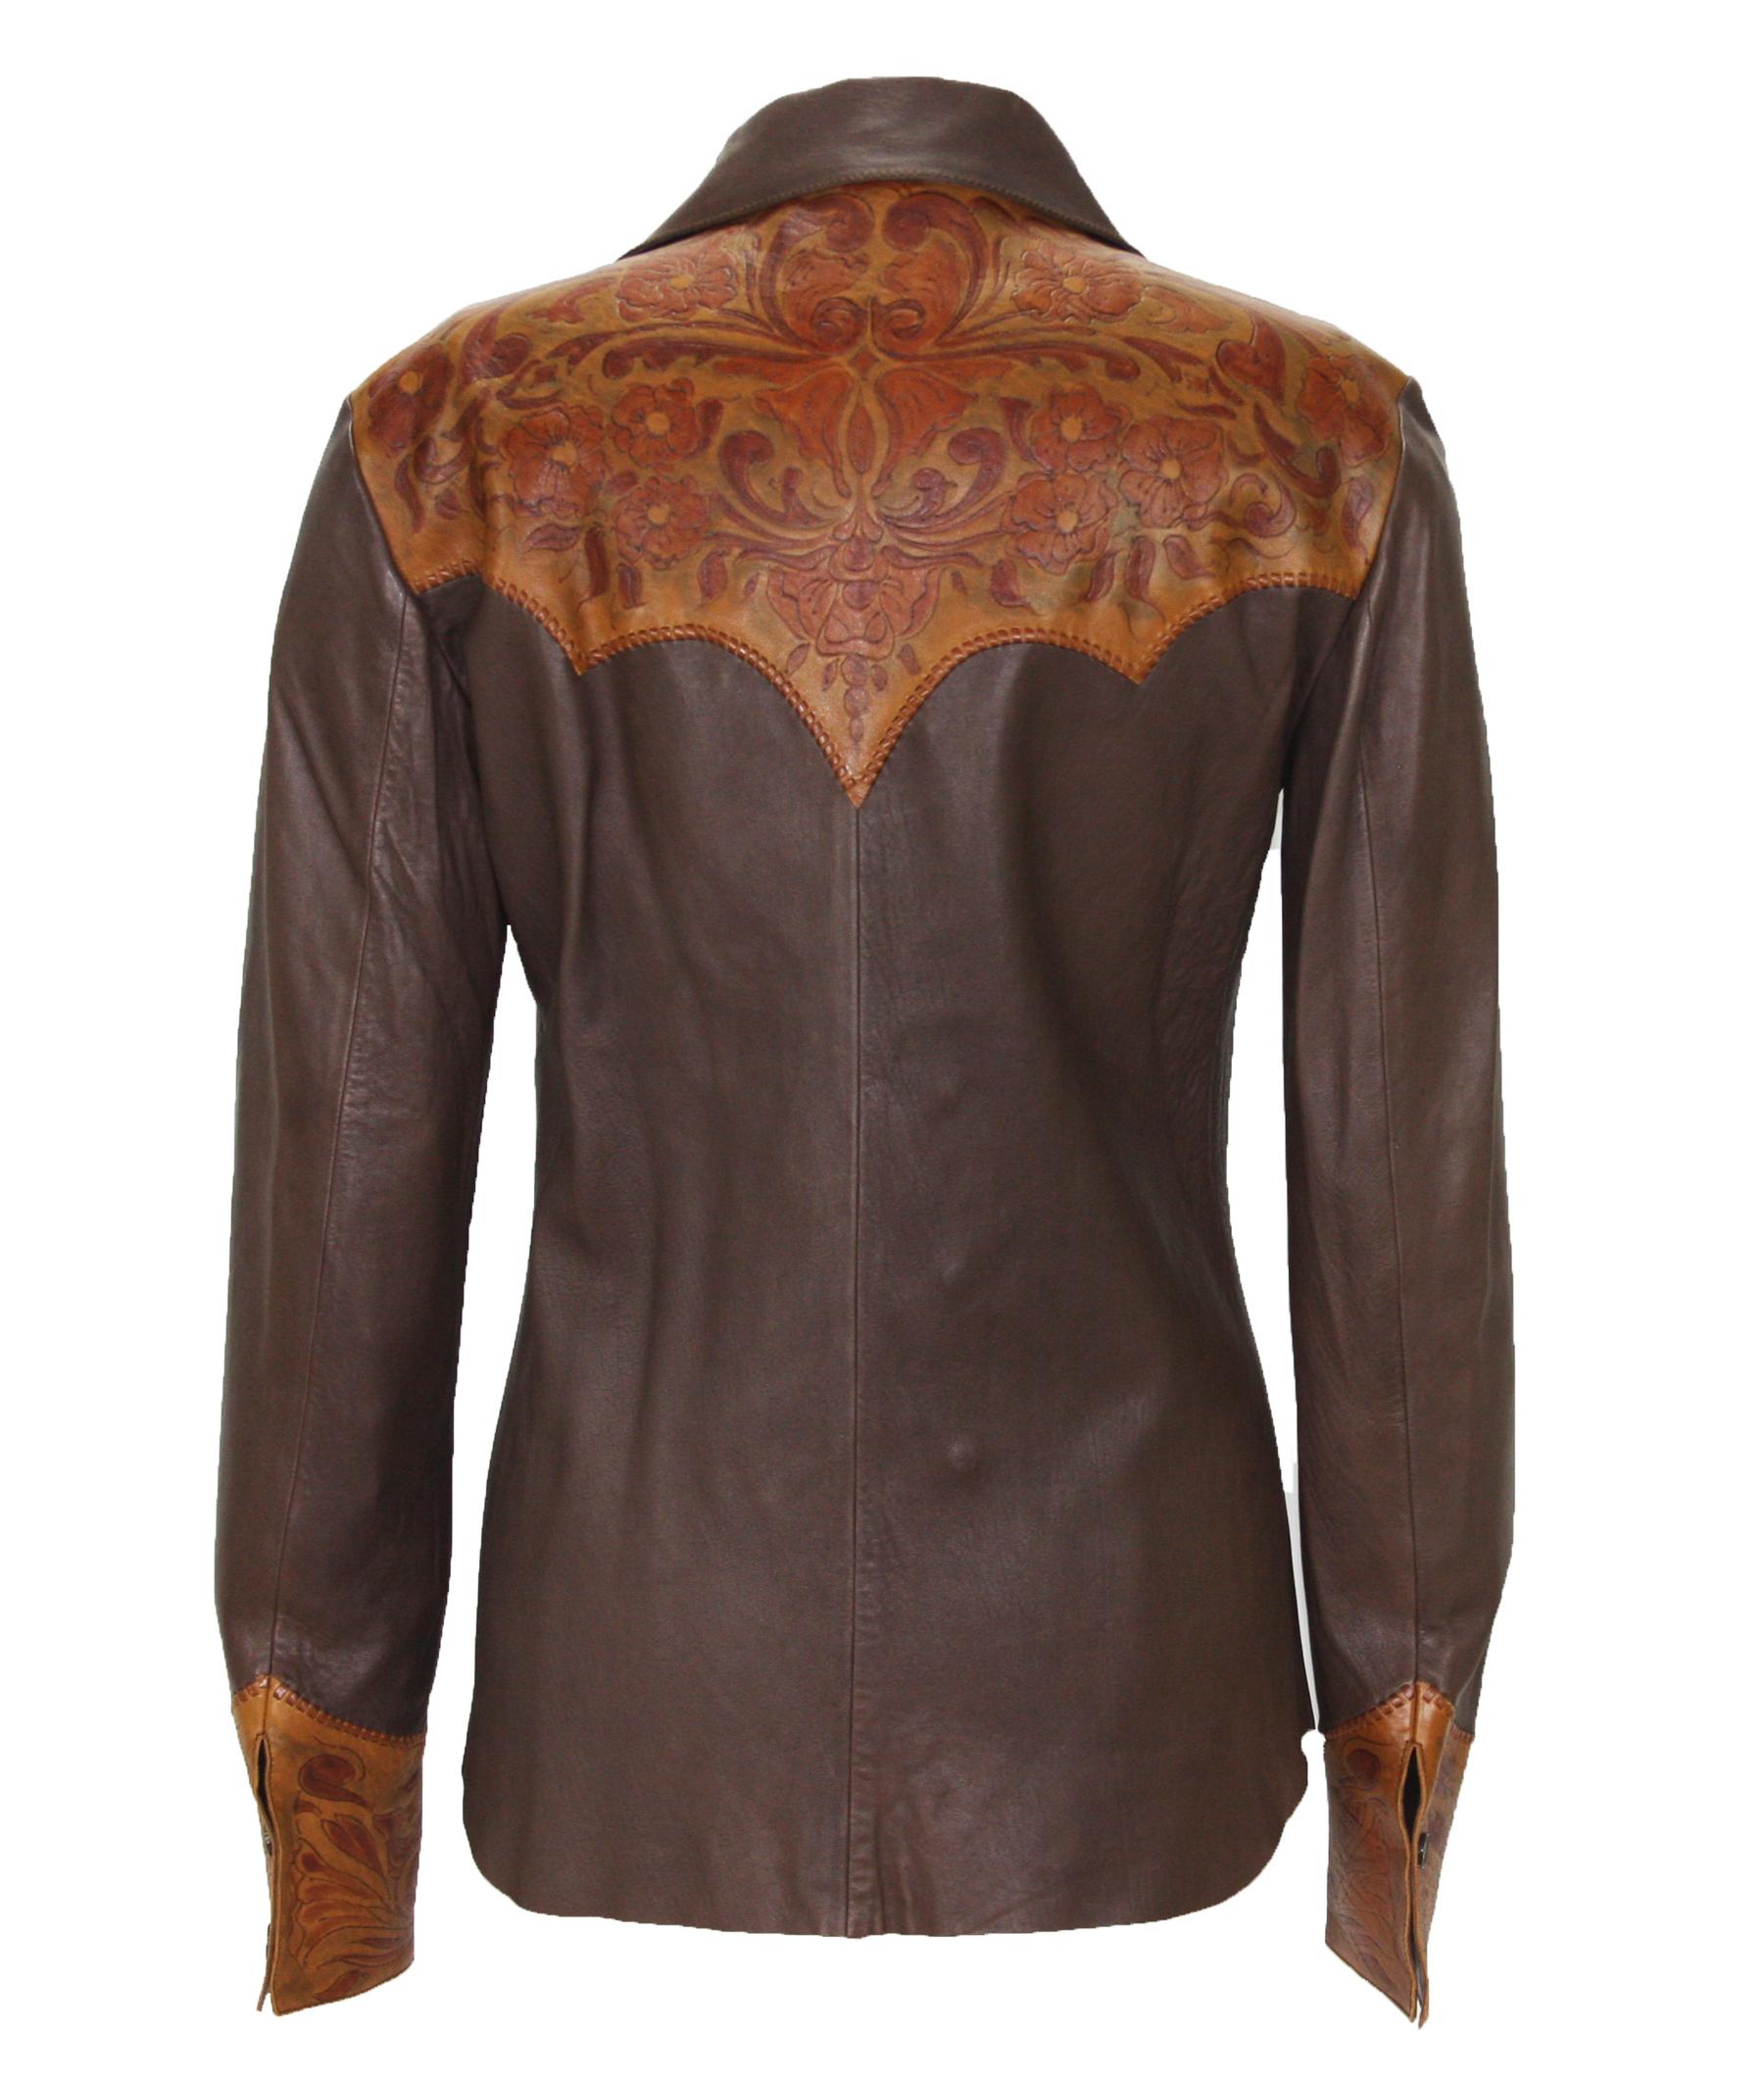 Very Rare Tom Ford for Gucci Runway Men's Leather Western Shirt
Spring / Summer 2004 Men's Collection
Designer size 48 - US 38
100% Leather, Saddle Stitching, Dual Button Cuffs, Button Closure, Point Collar.
Measurements: Length - 28 inches, Armpit